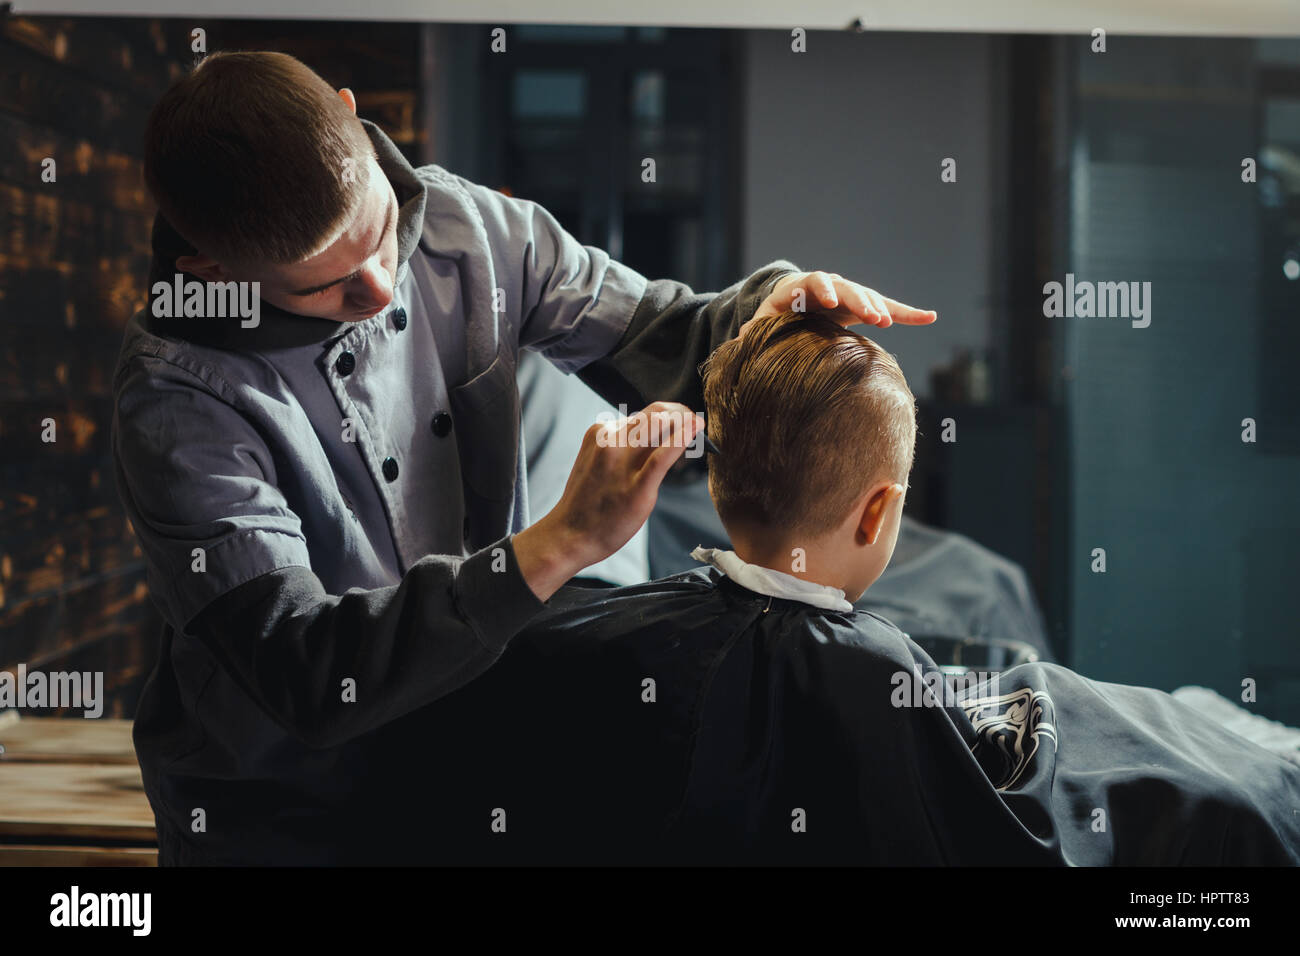 Little Boy Getting Haircut By Barber While Sitting In Chair At Barbershop. Barbershop Theme Stock Photo